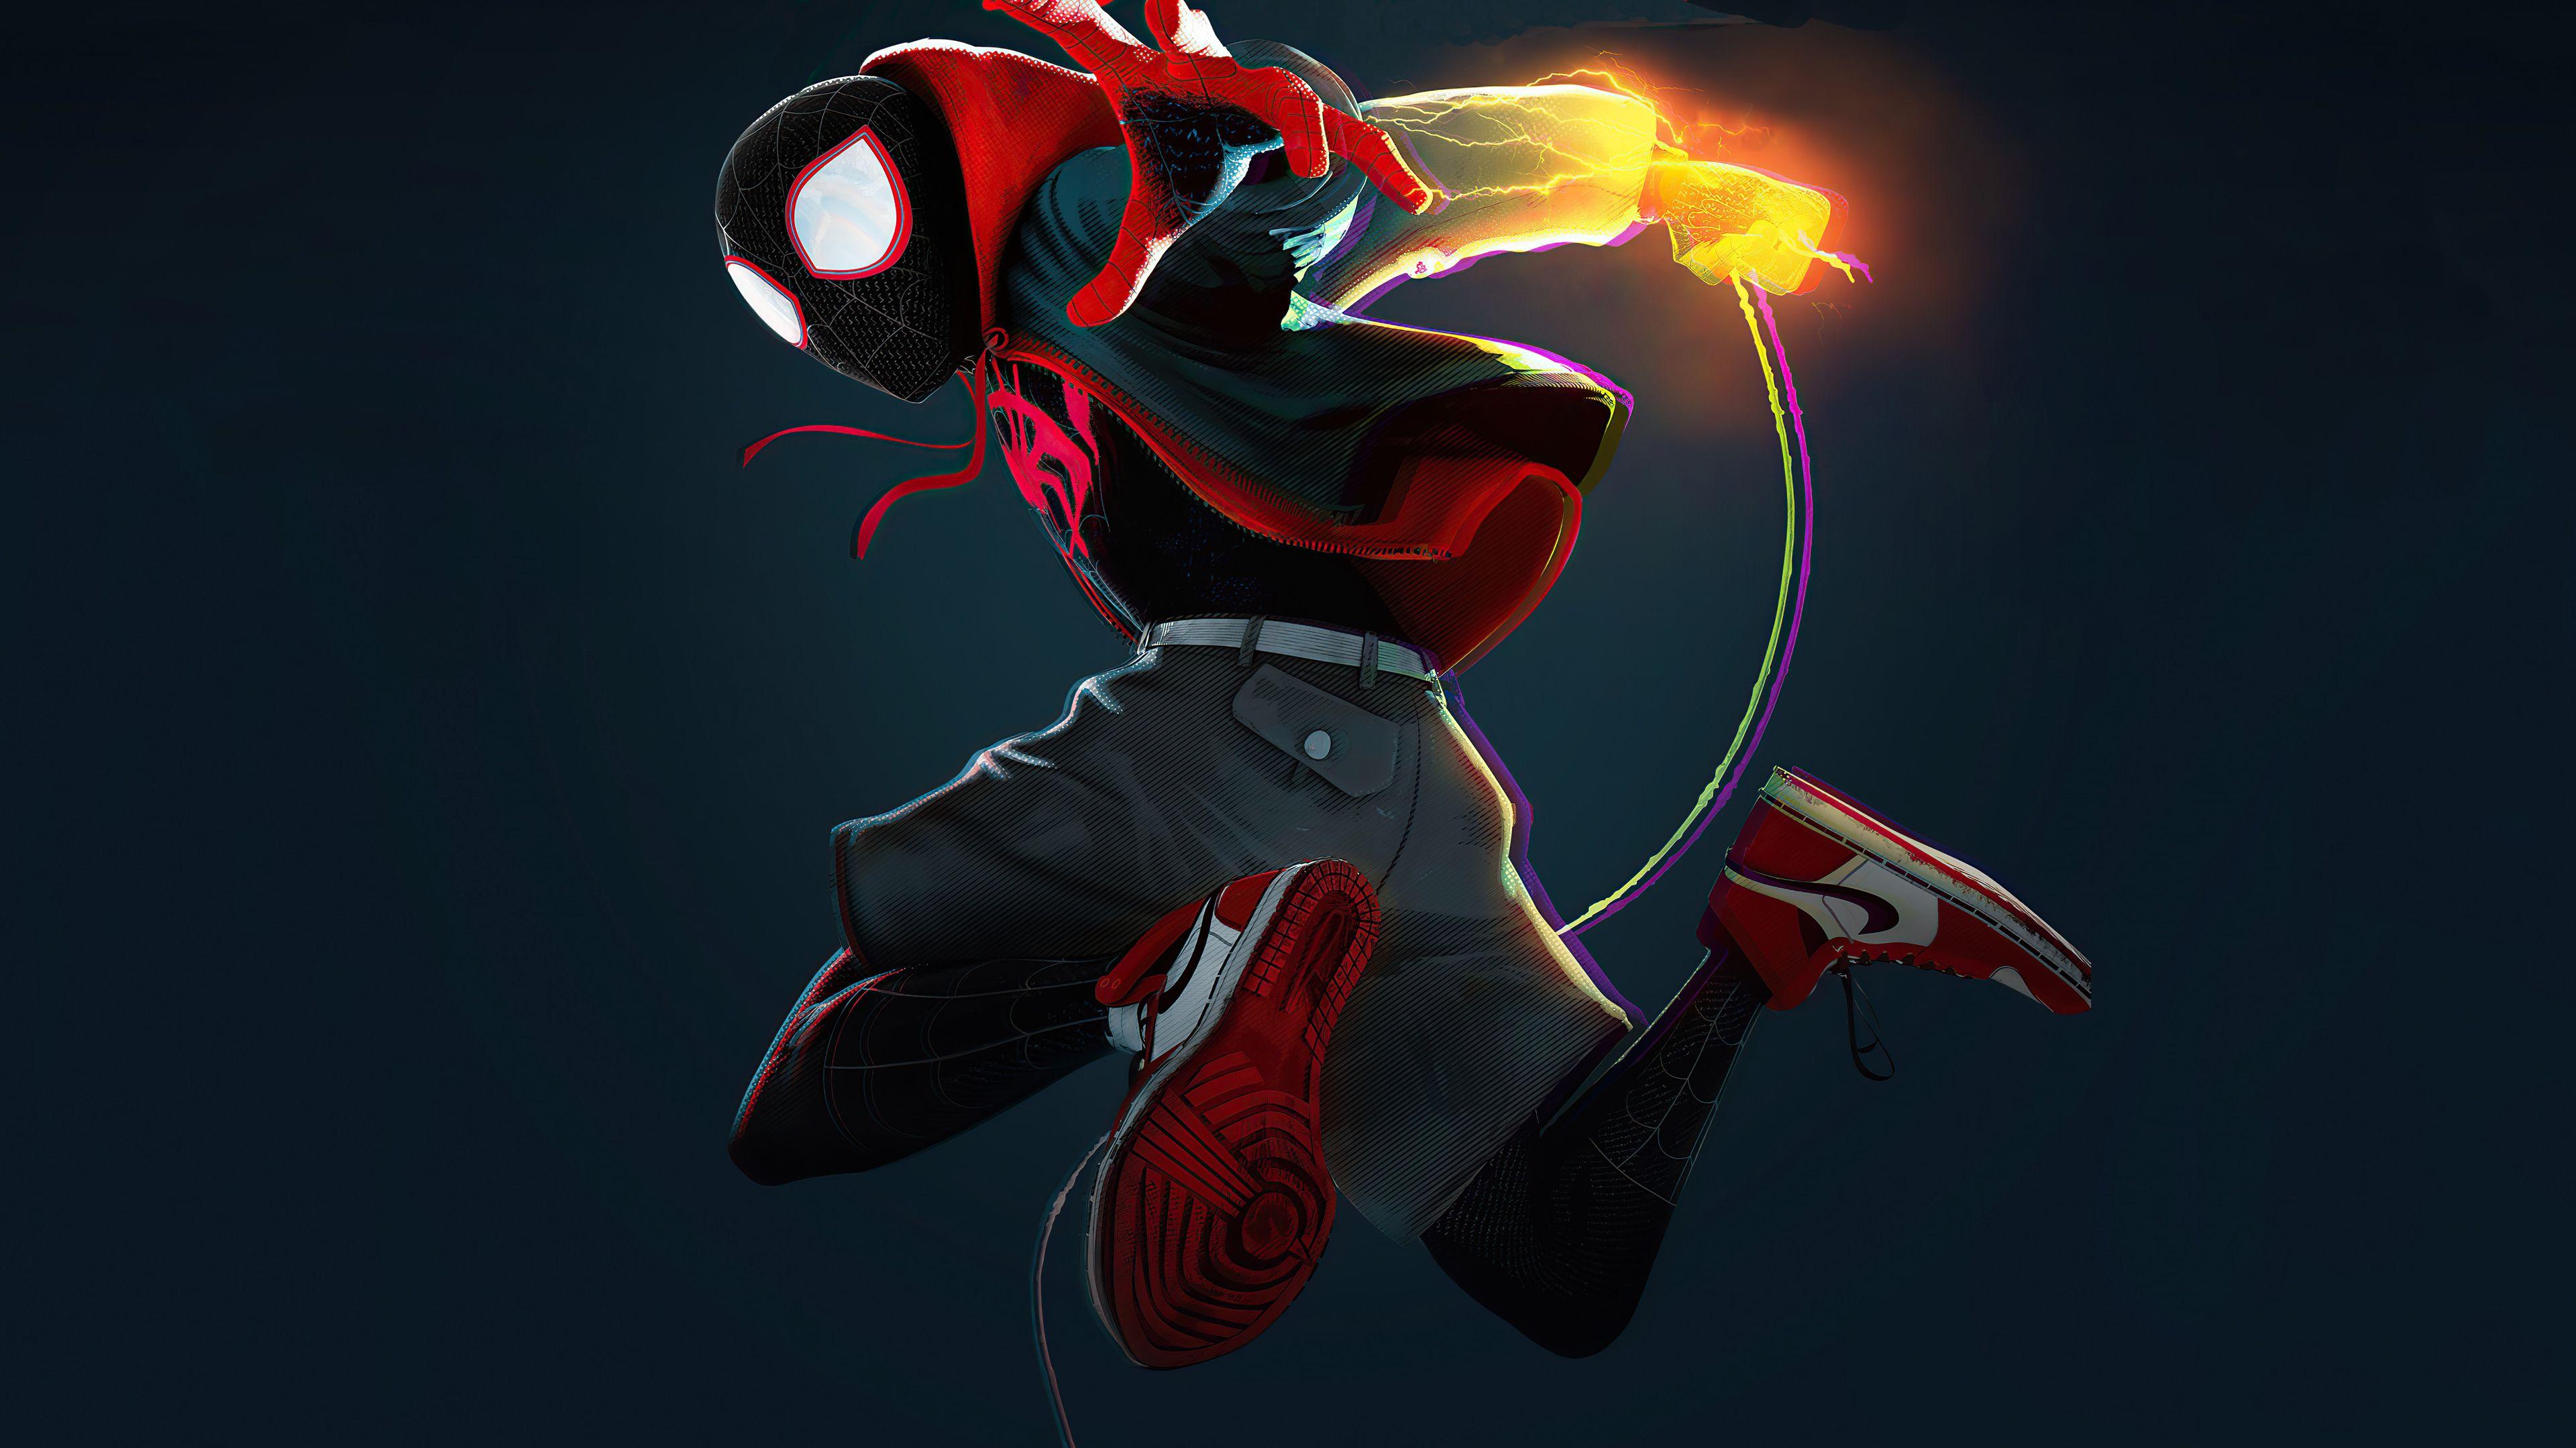 Download wallpaper 1125x2436 marvel's spider-man, miles morales, jumping,  fan art, iphone x, 1125x2436 hd background, 26570